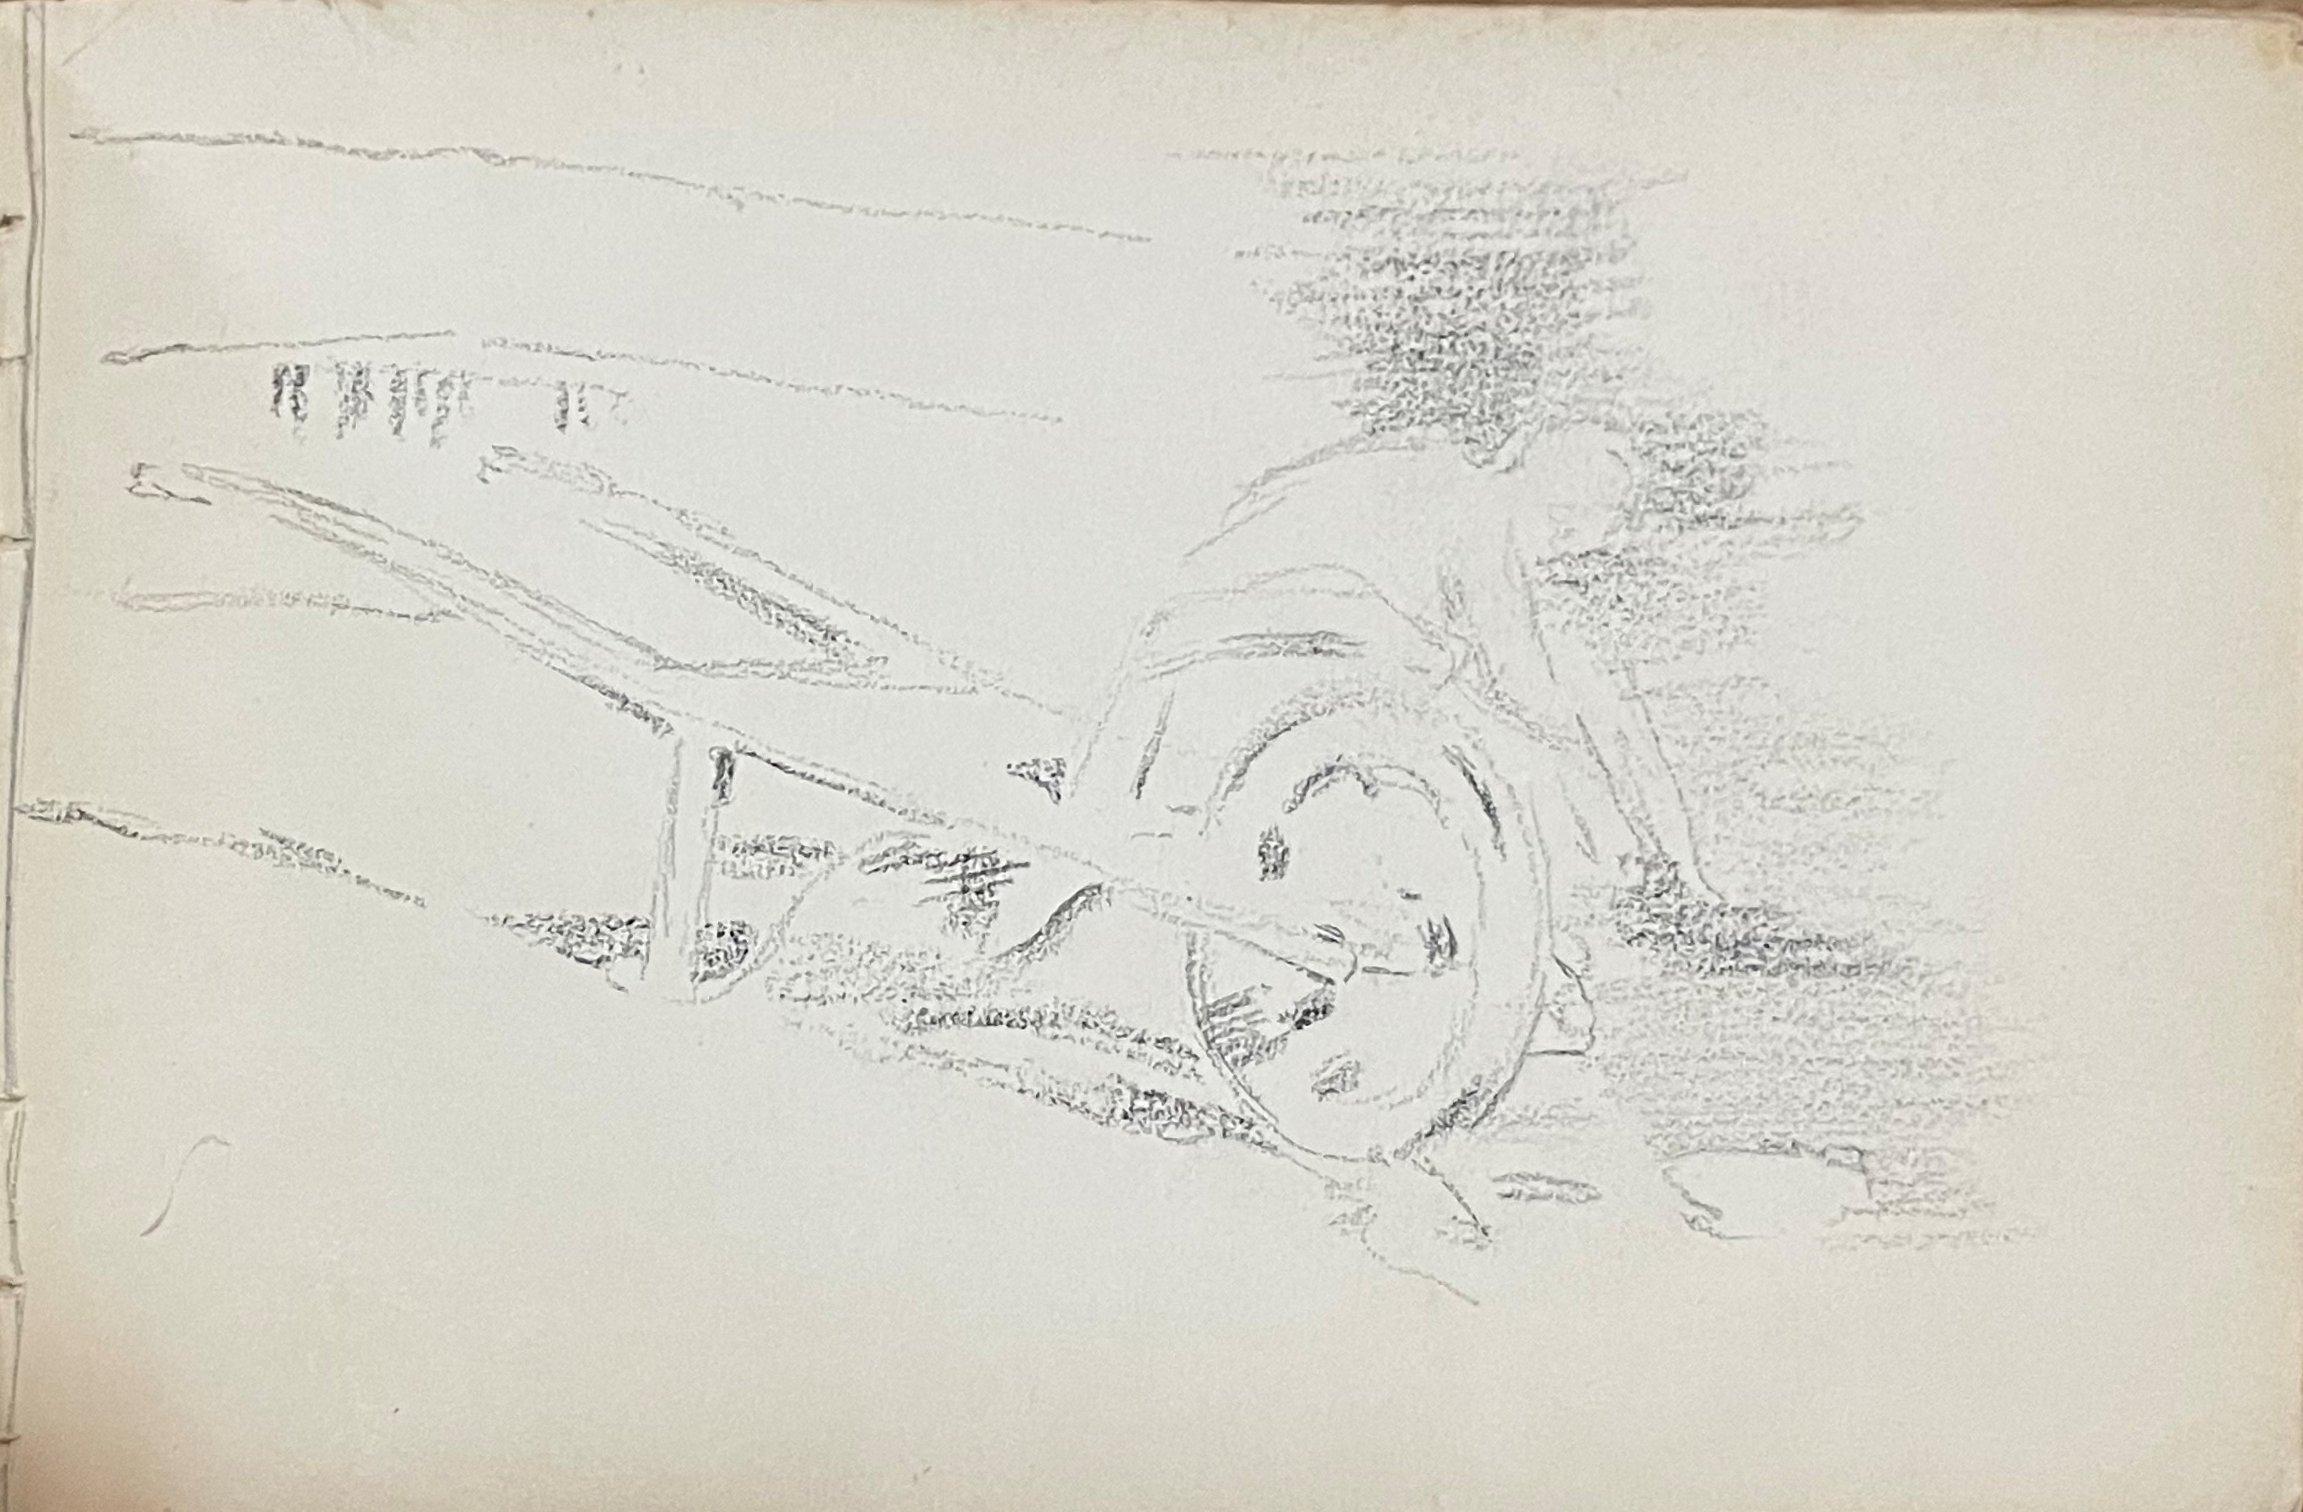 Theodore Robinson (1852 – 1896)
Sketchbook, 1888
Pencil and ink on paper (approximately 25 drawings)
5 x 6 inches

Provenance:
Antes Estate, Evansville, Wisconsin 
Bunte Auction Services, September 25, 2005, Lot 1400C ($17,500)
Spanierman Gallery,